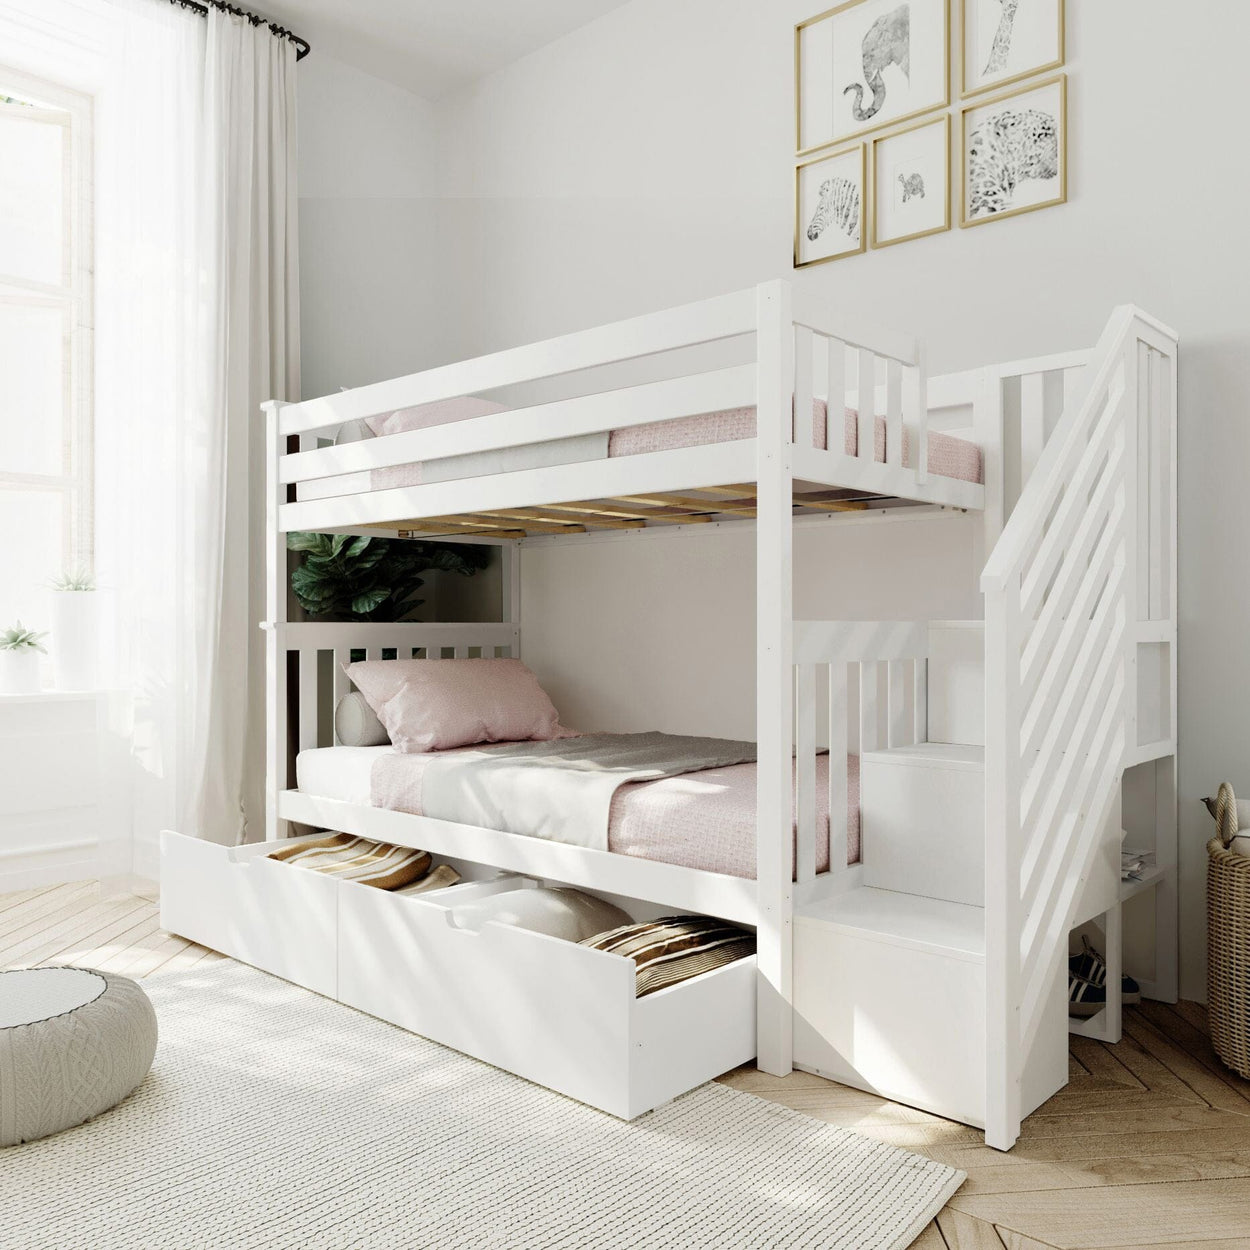 187205-002 : Bunk Beds Twin over Twin Staircase Bunk with Storage Drawers, White